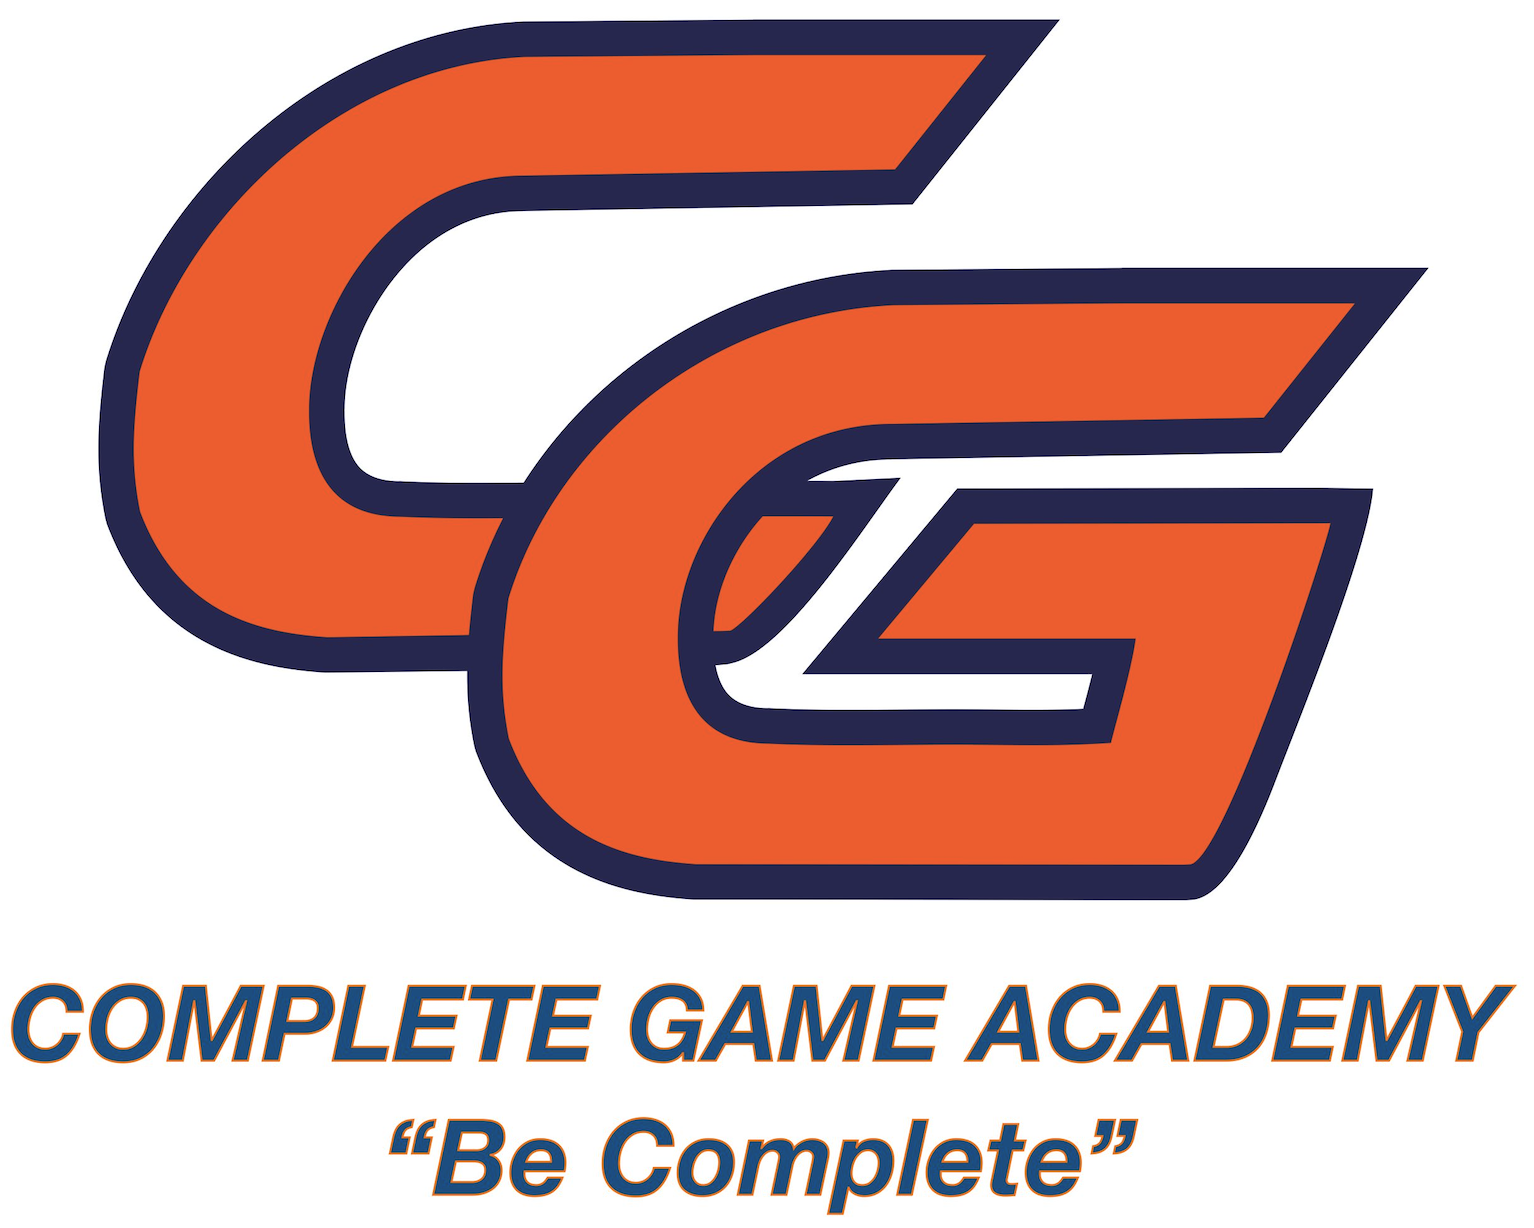 Complete Game Academy